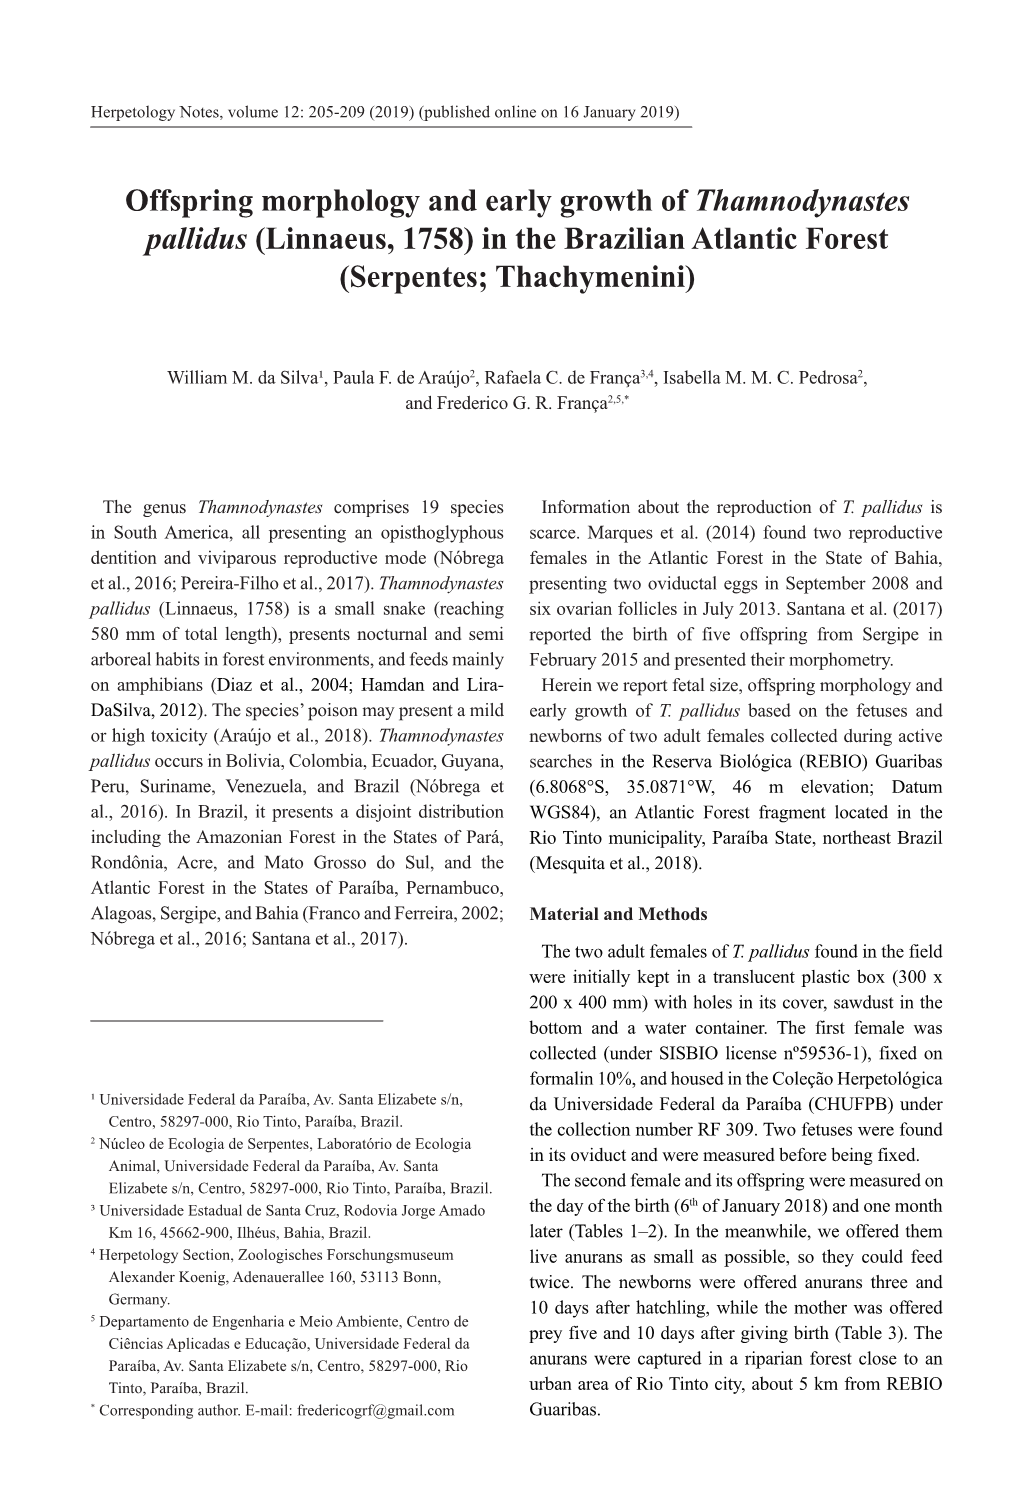 Offspring Morphology and Early Growth of Thamnodynastes Pallidus (Linnaeus, 1758) in the Brazilian Atlantic Forest (Serpentes; Thachymenini)